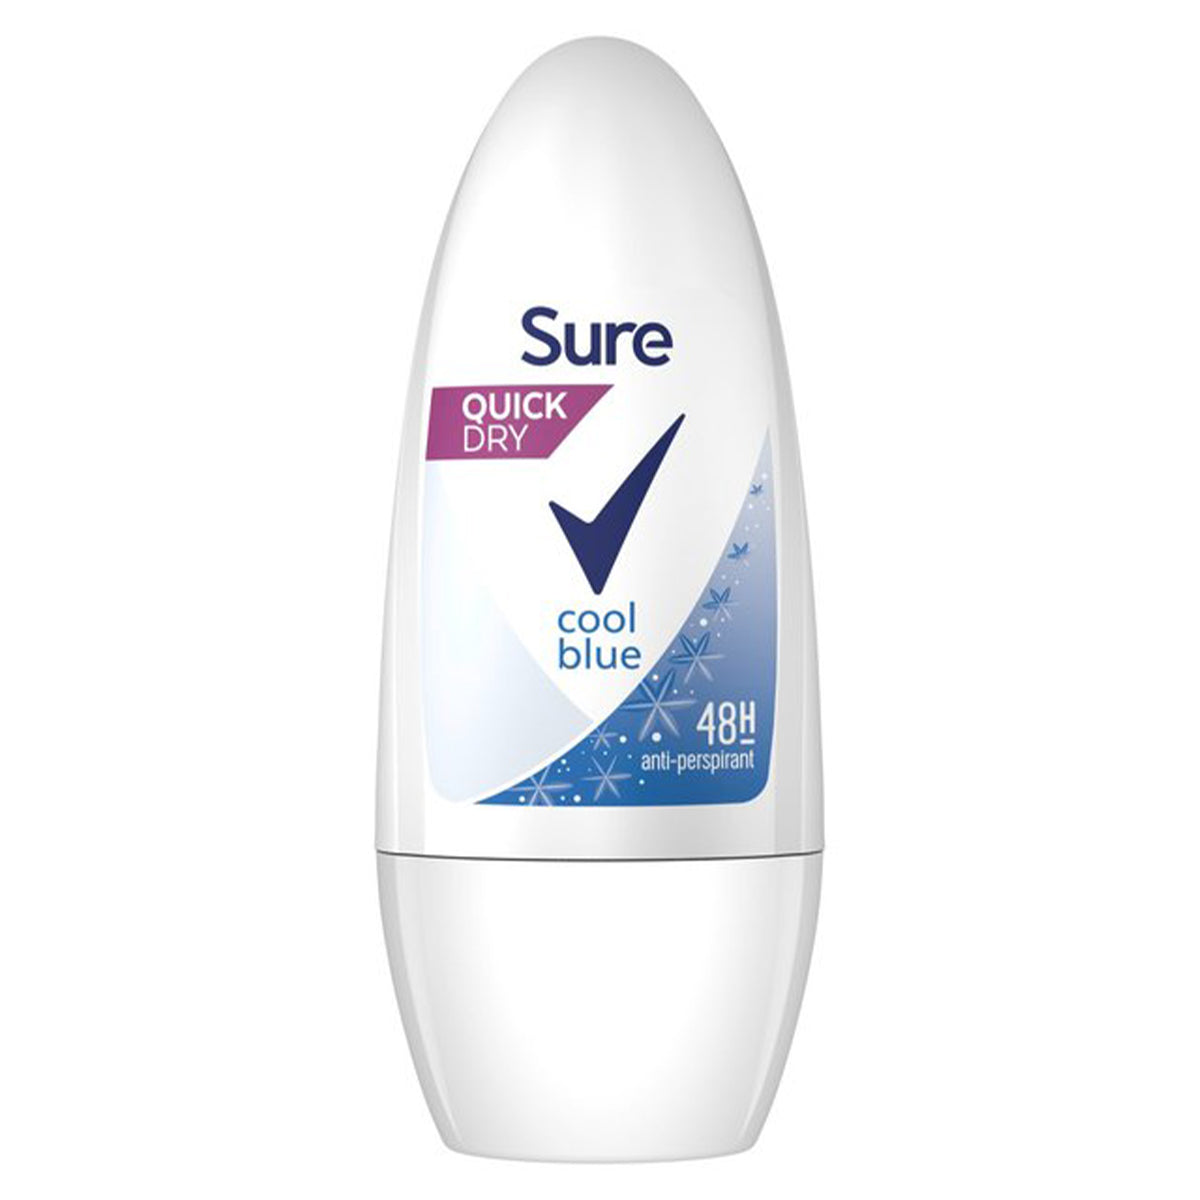 A tube of Dove Sure Women Cool Blue Roll On Deodorant - 50ml with a white tube on a white background.